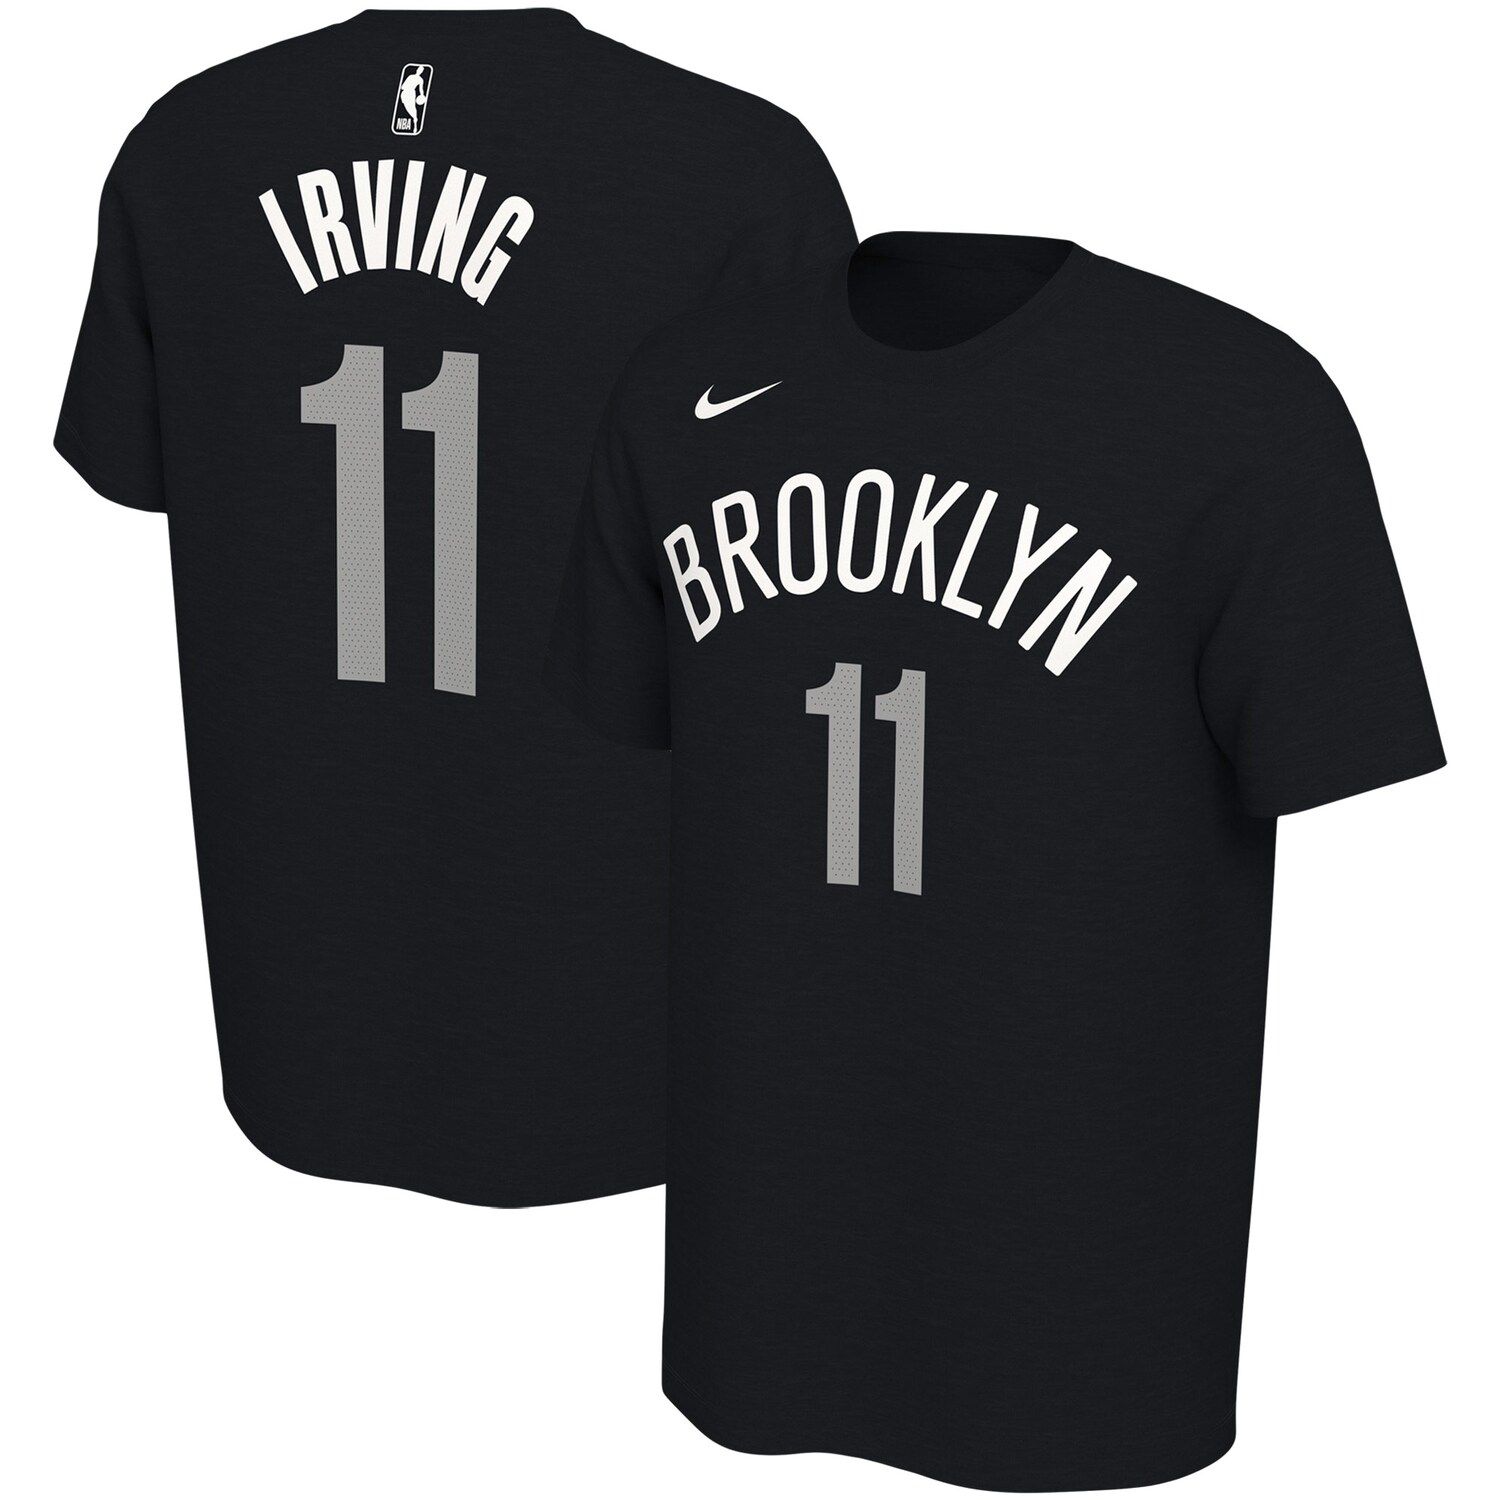 kyrie jersey number